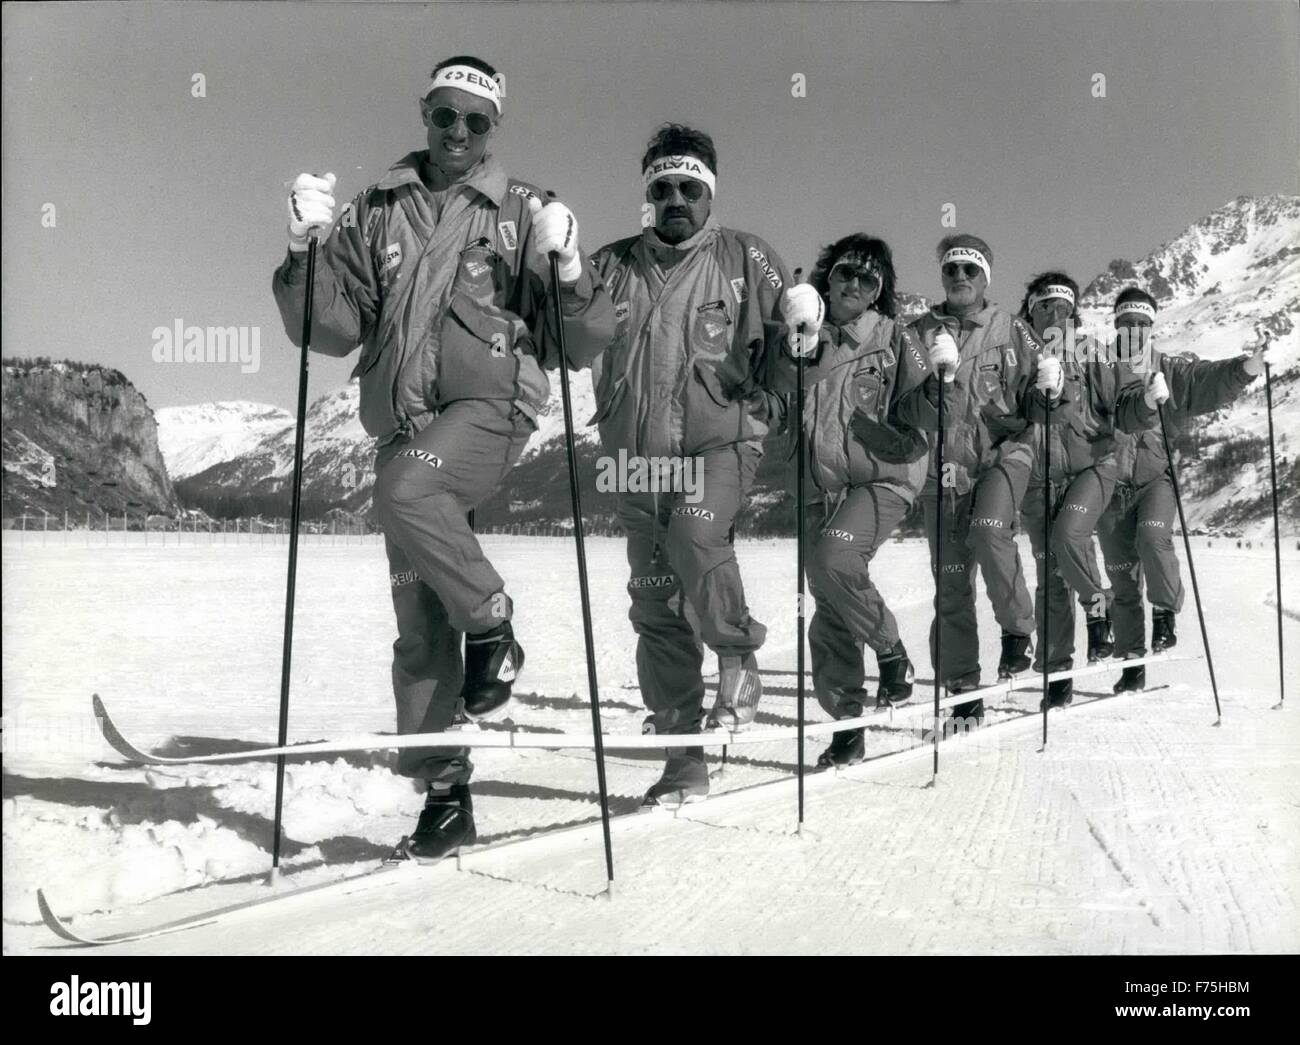 1972 - Six people on two skis During the traditional Nordic ski marathon, taking place in Engadin, part of Canton of Grisons, on upcoming Sunday Marchill, six people try to absolve the whole marathon together on two skis. If they succeed, they for sure gonna set a new record for the famous Guiness Book of Records. Picture: Peter Glaus, Martin Neeser, Marianne Fuchs, Adrian Fuchs, Rita Pfister and Markus Kappeler f.l.t.r. during a warm up still to exercise their coordination. © Keystone Pictures USA/ZUMAPRESS.com/Alamy Live News Stock Photo